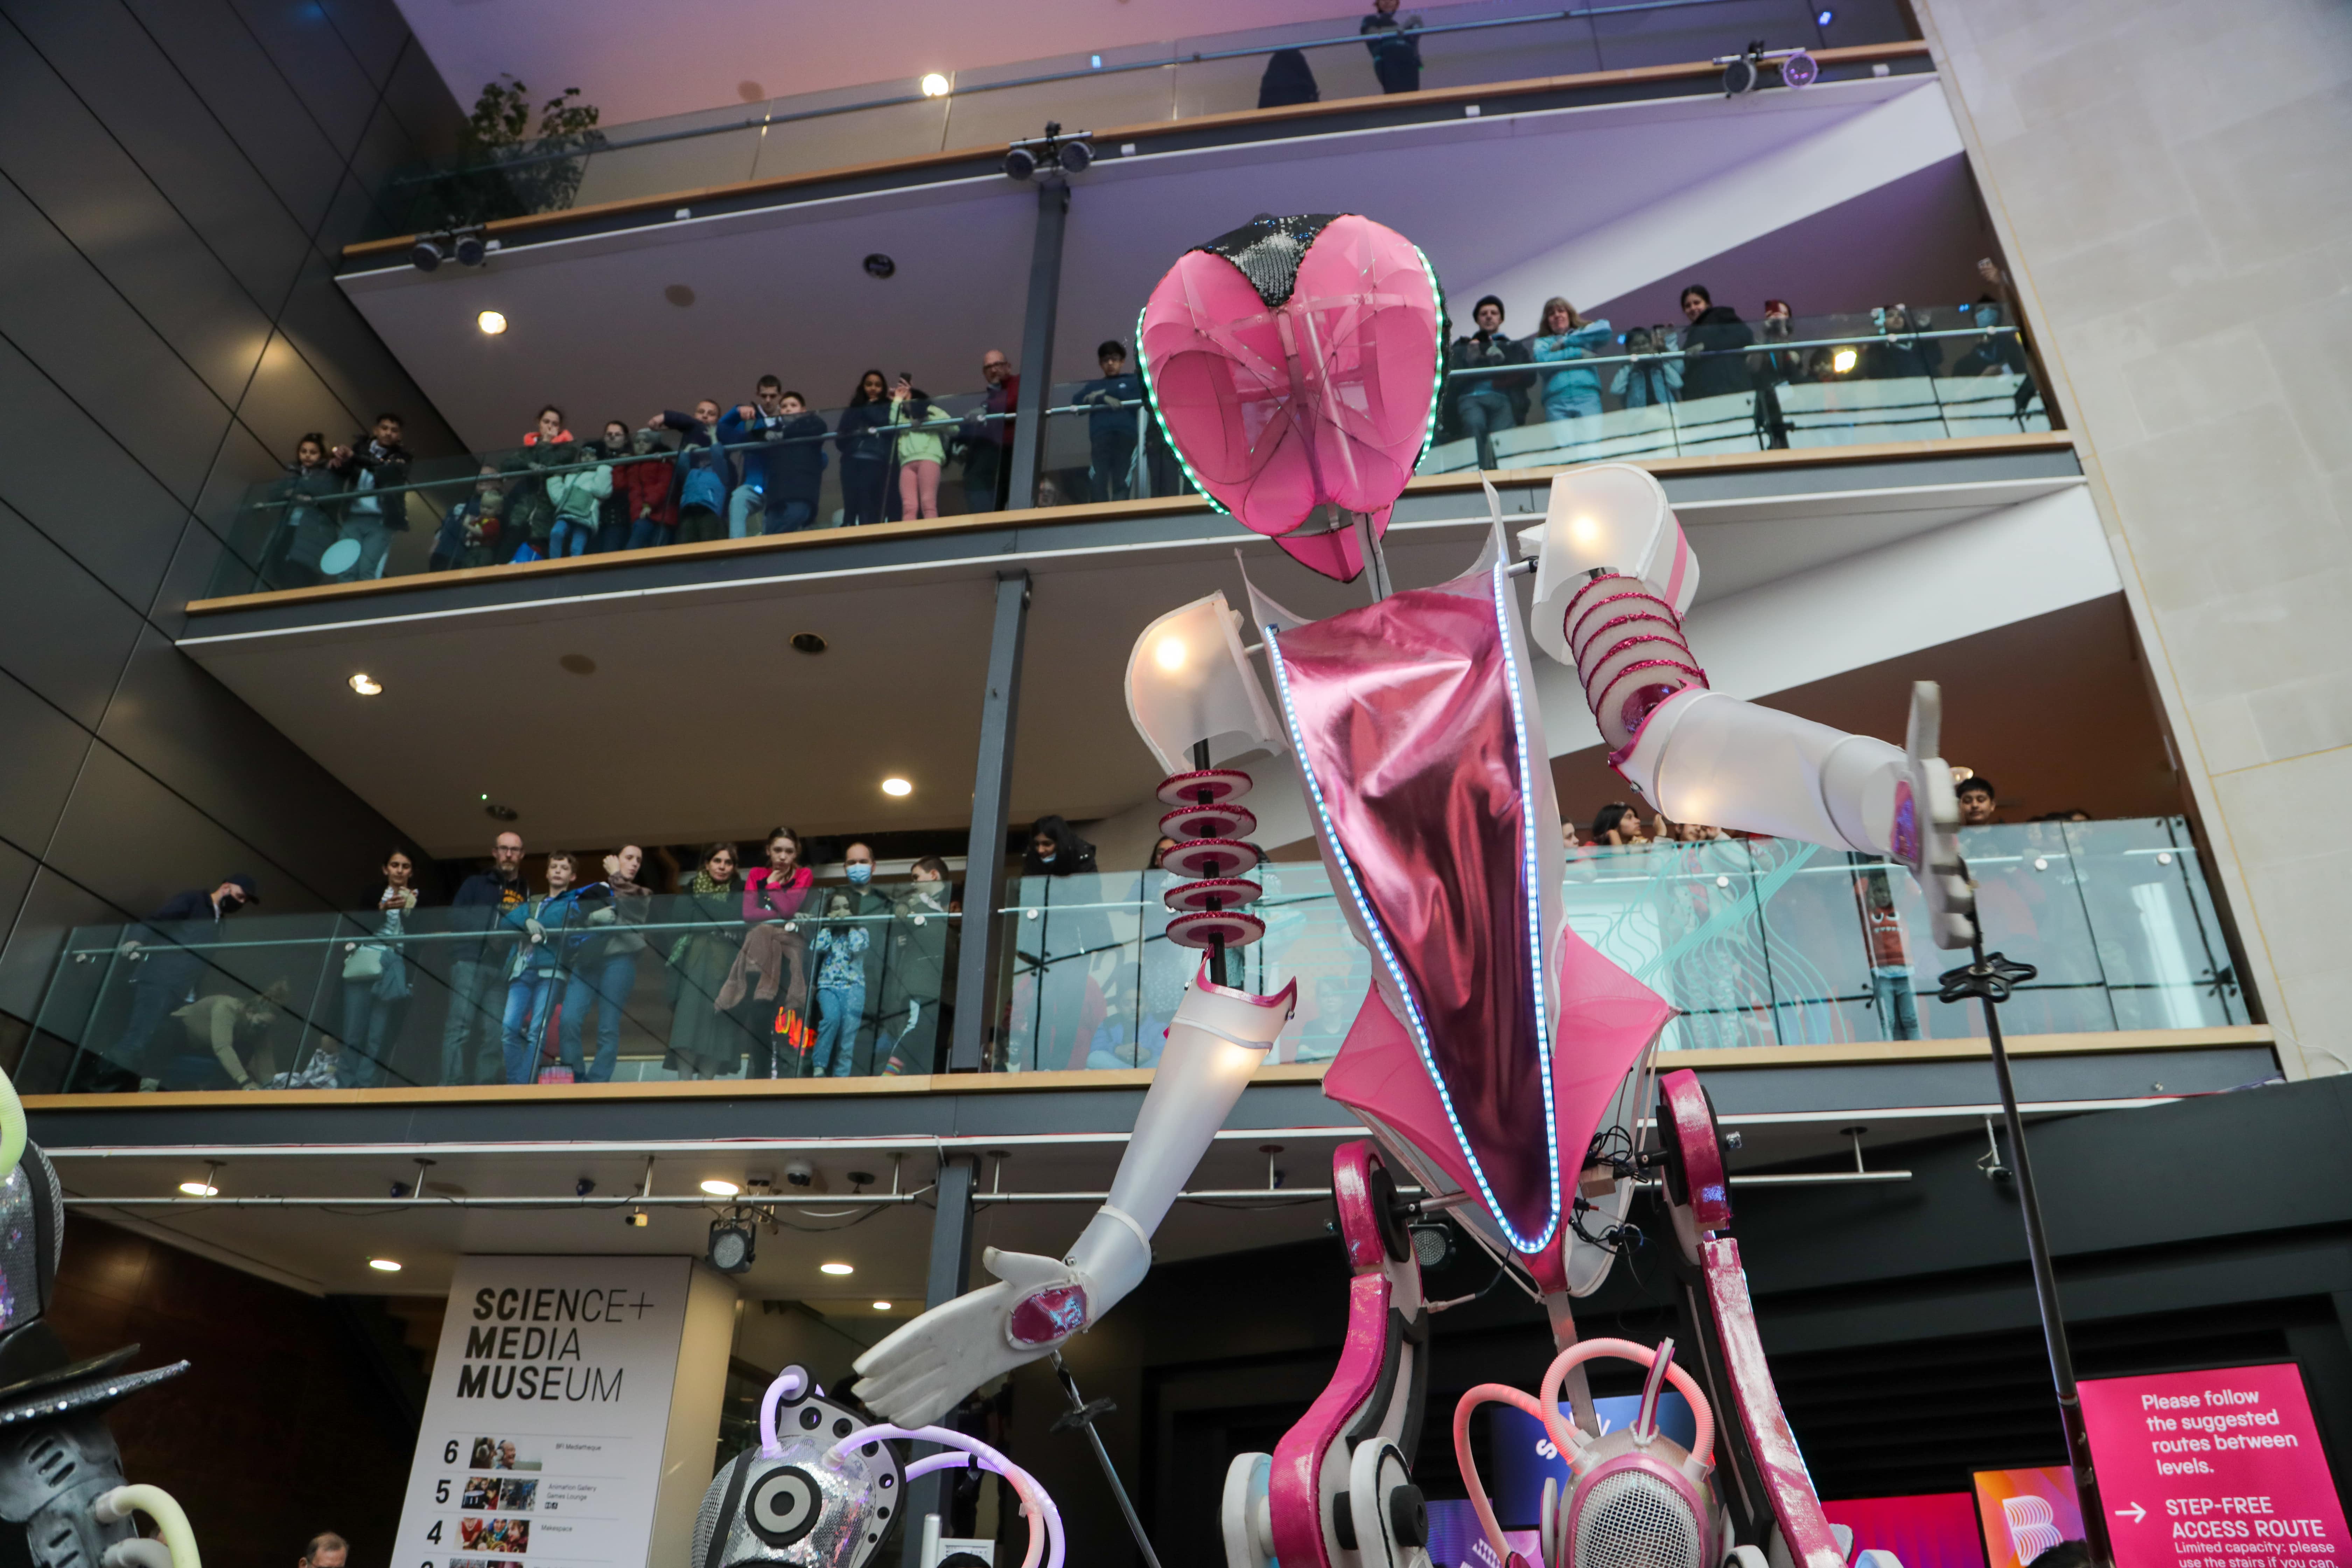 A giant pink and white puppet looms large in the foyer of the National Science and Media museum, with people looking down from the balconies.